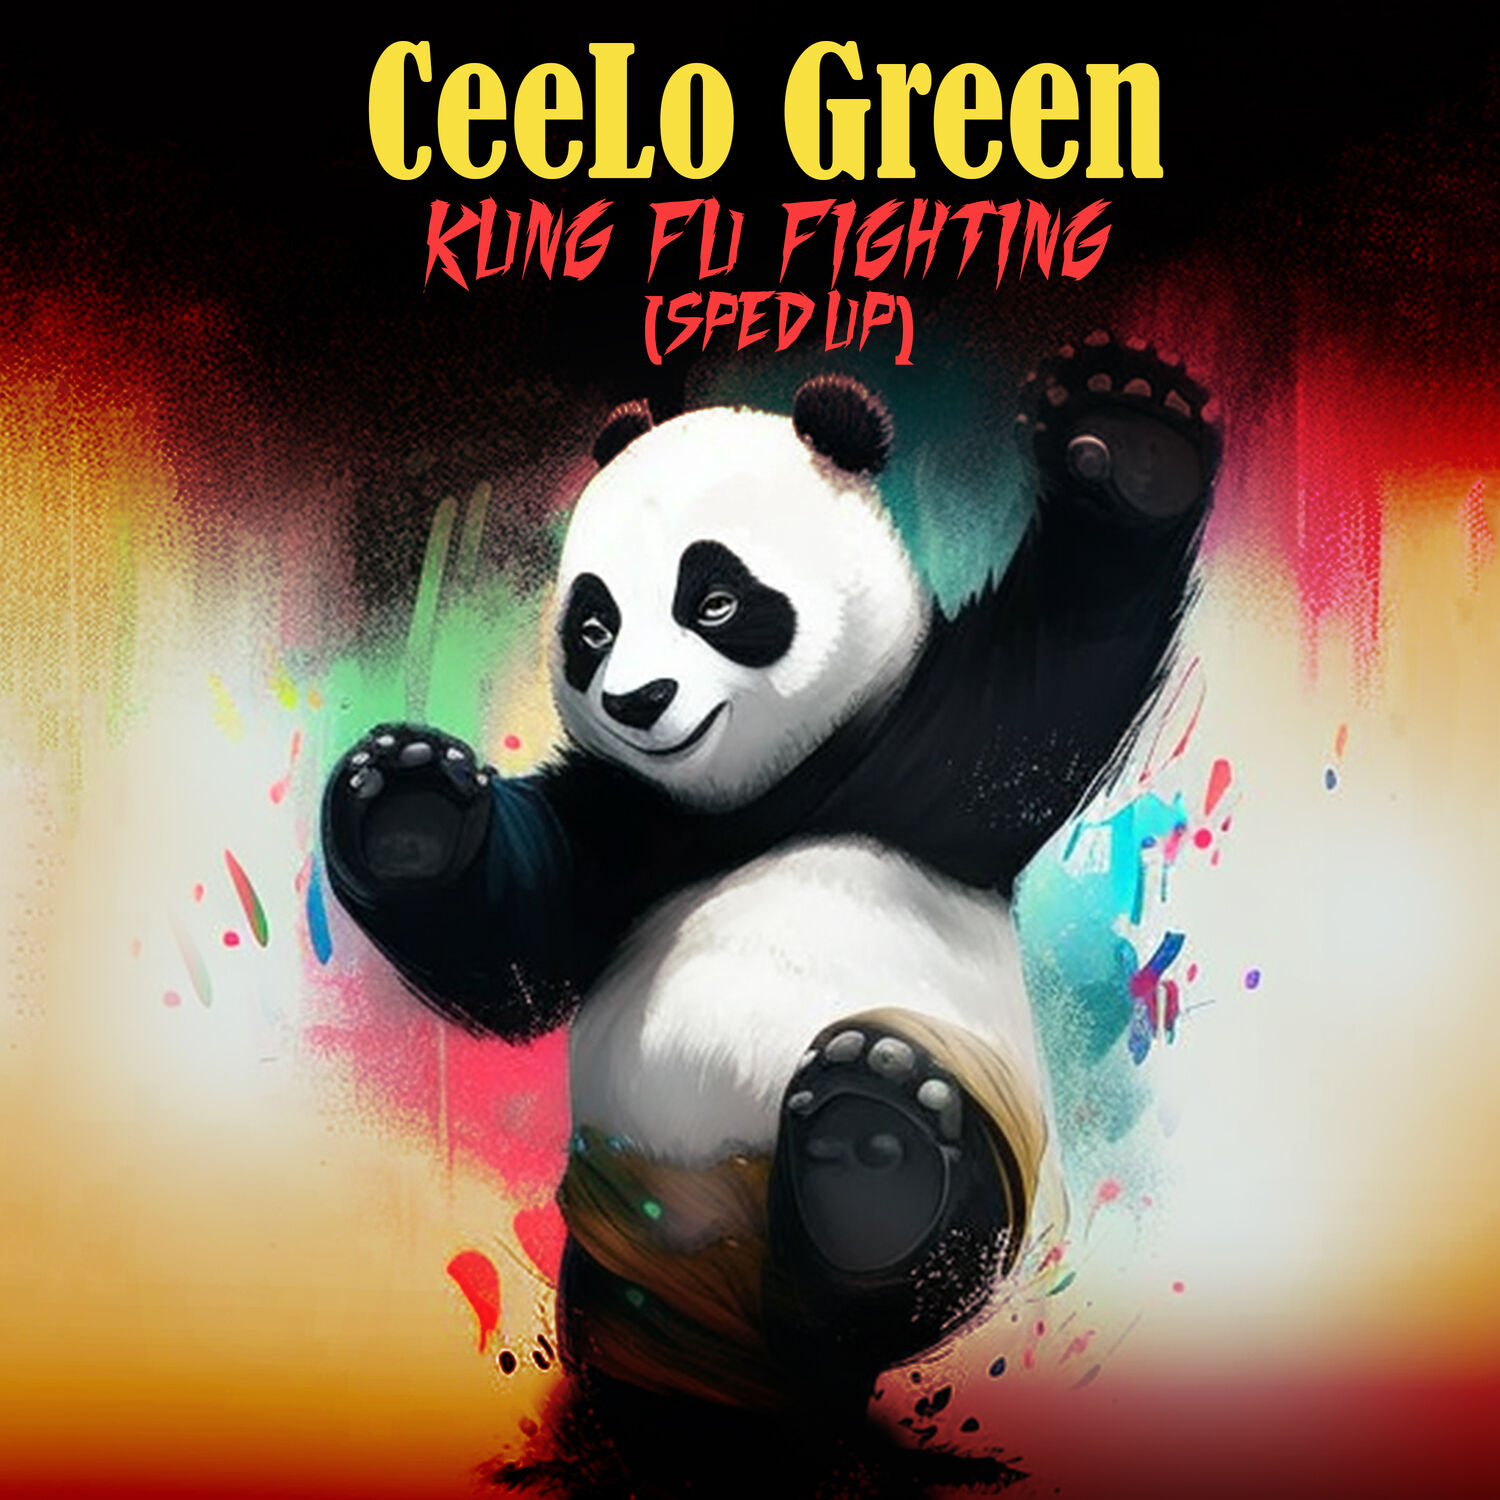 Cee-Lo Green – Kung Fu Fighting (Re-recorded – Sped up)【44.1kHz／16bit】意大利区-OppsUpro音乐帝国